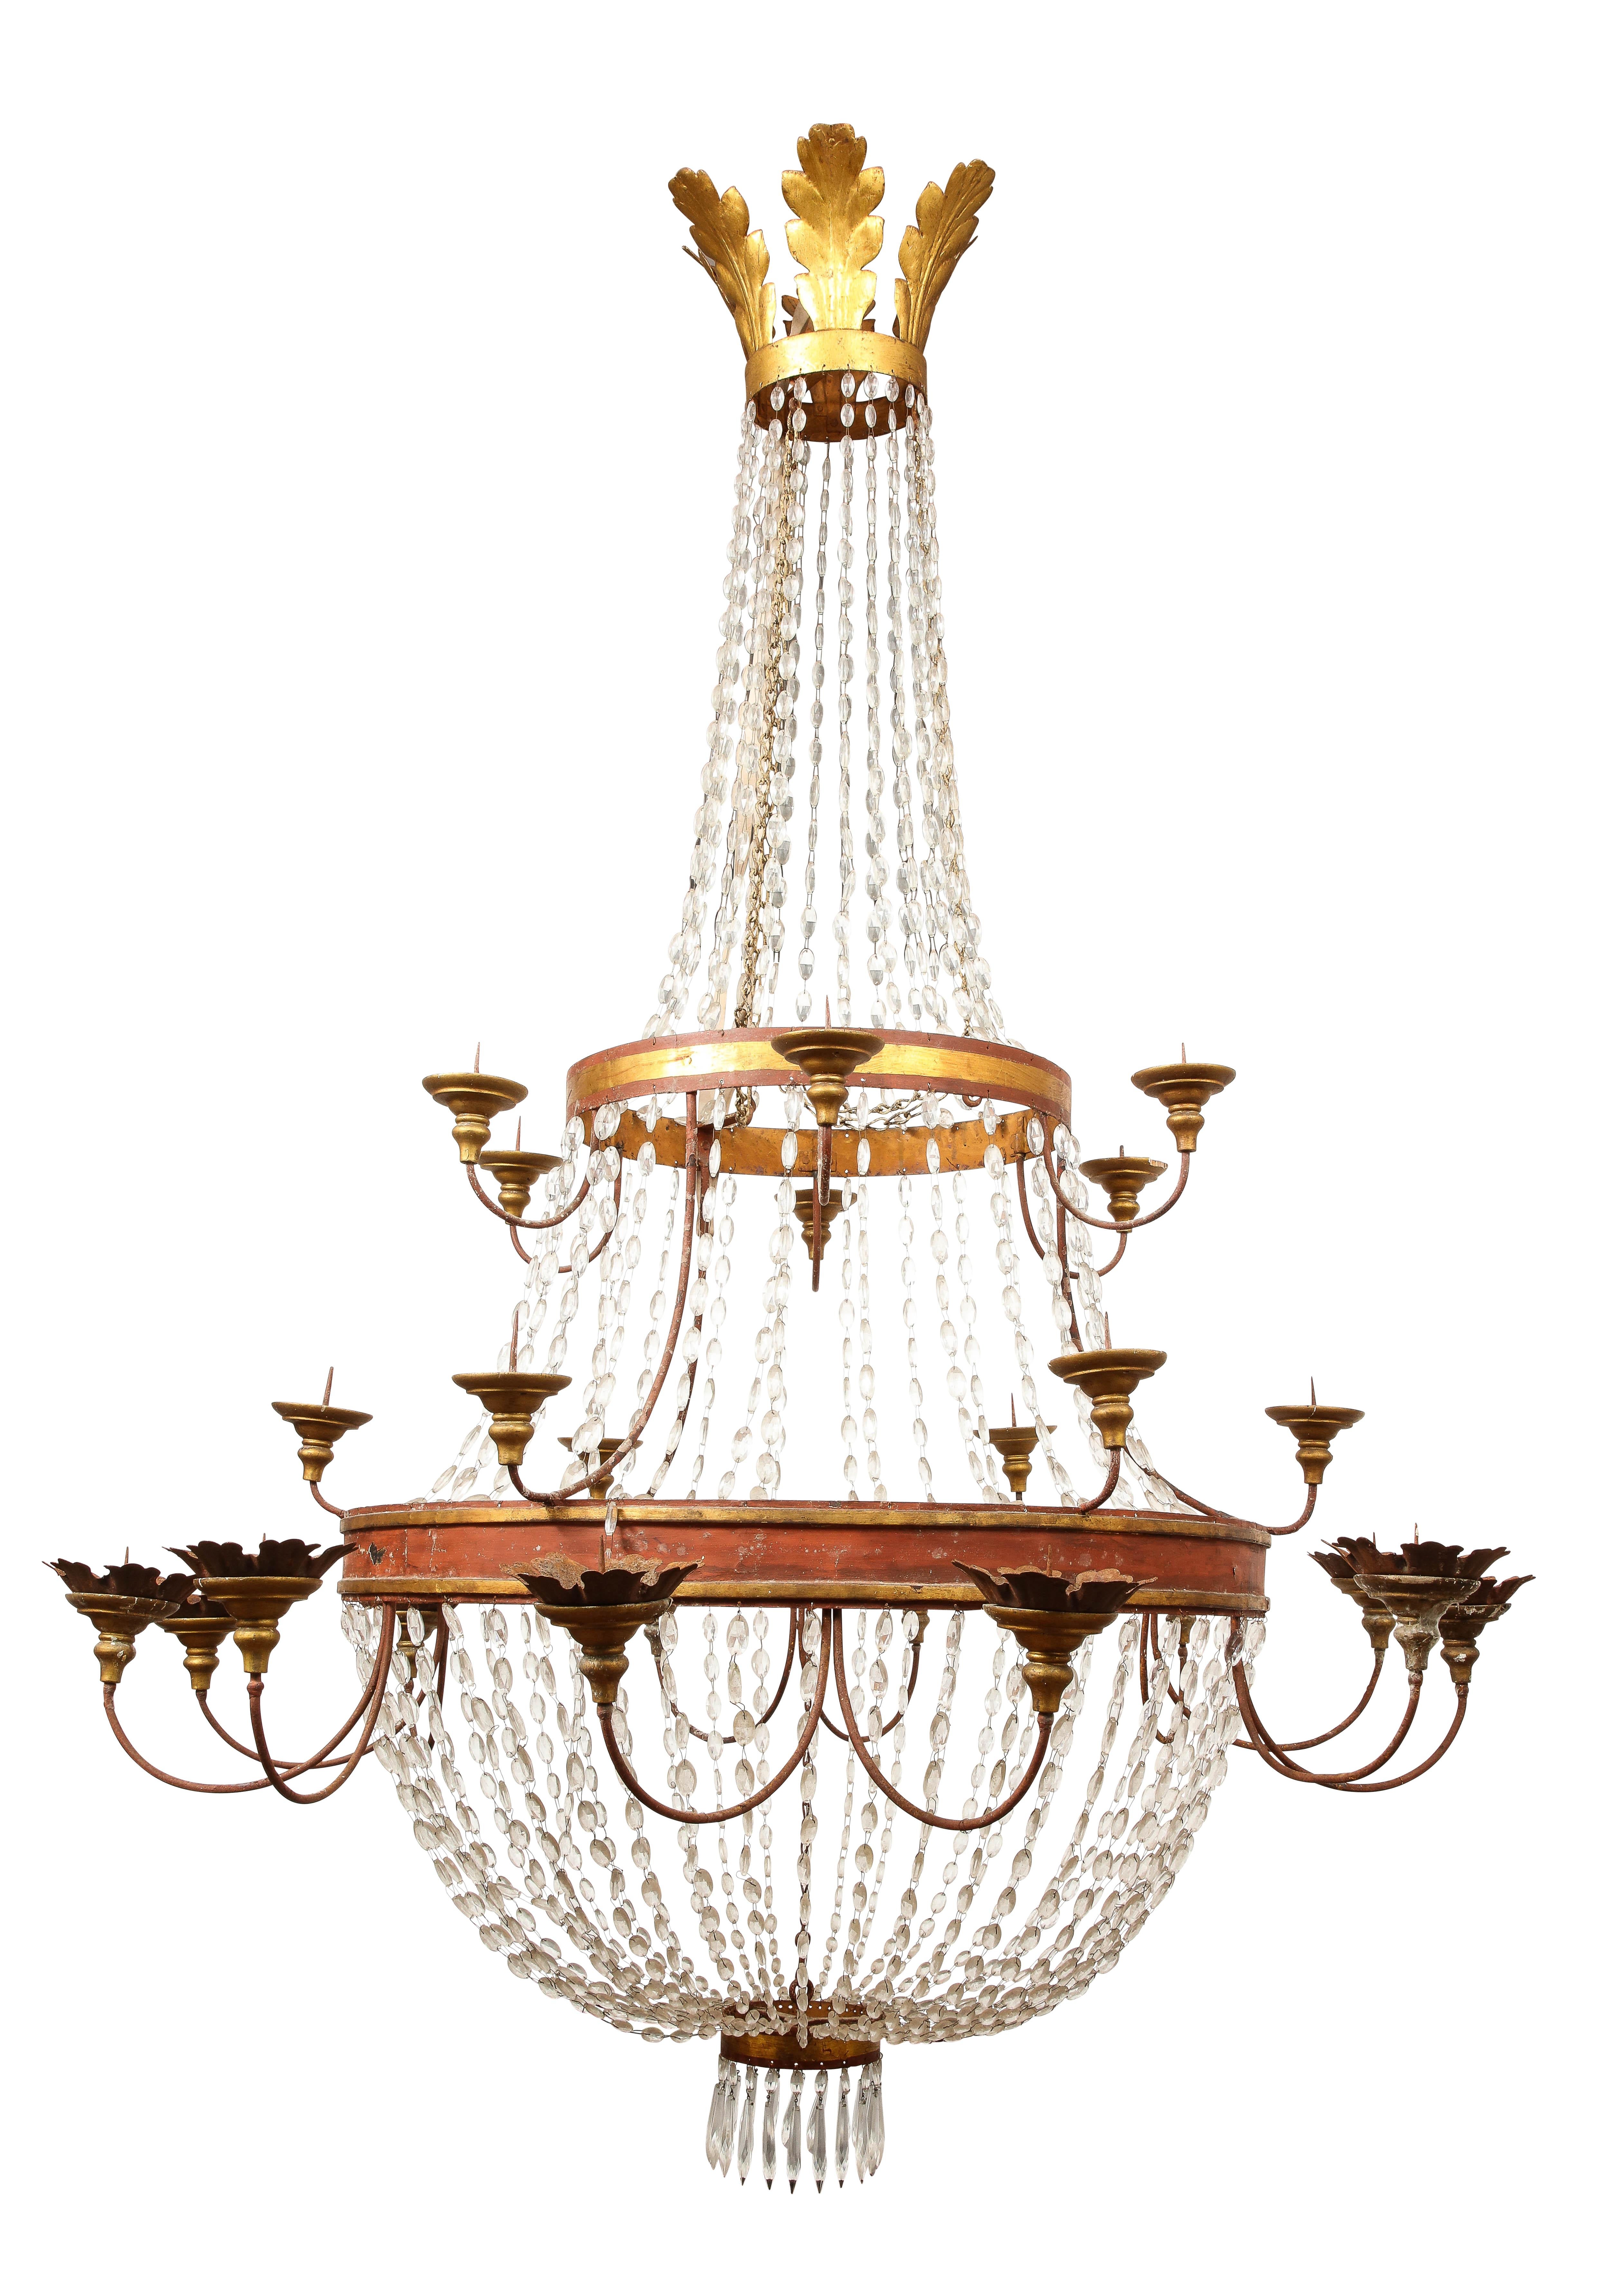 Neoclassical 17th Century Italian Crystal and Gilt Chandelier  For Sale